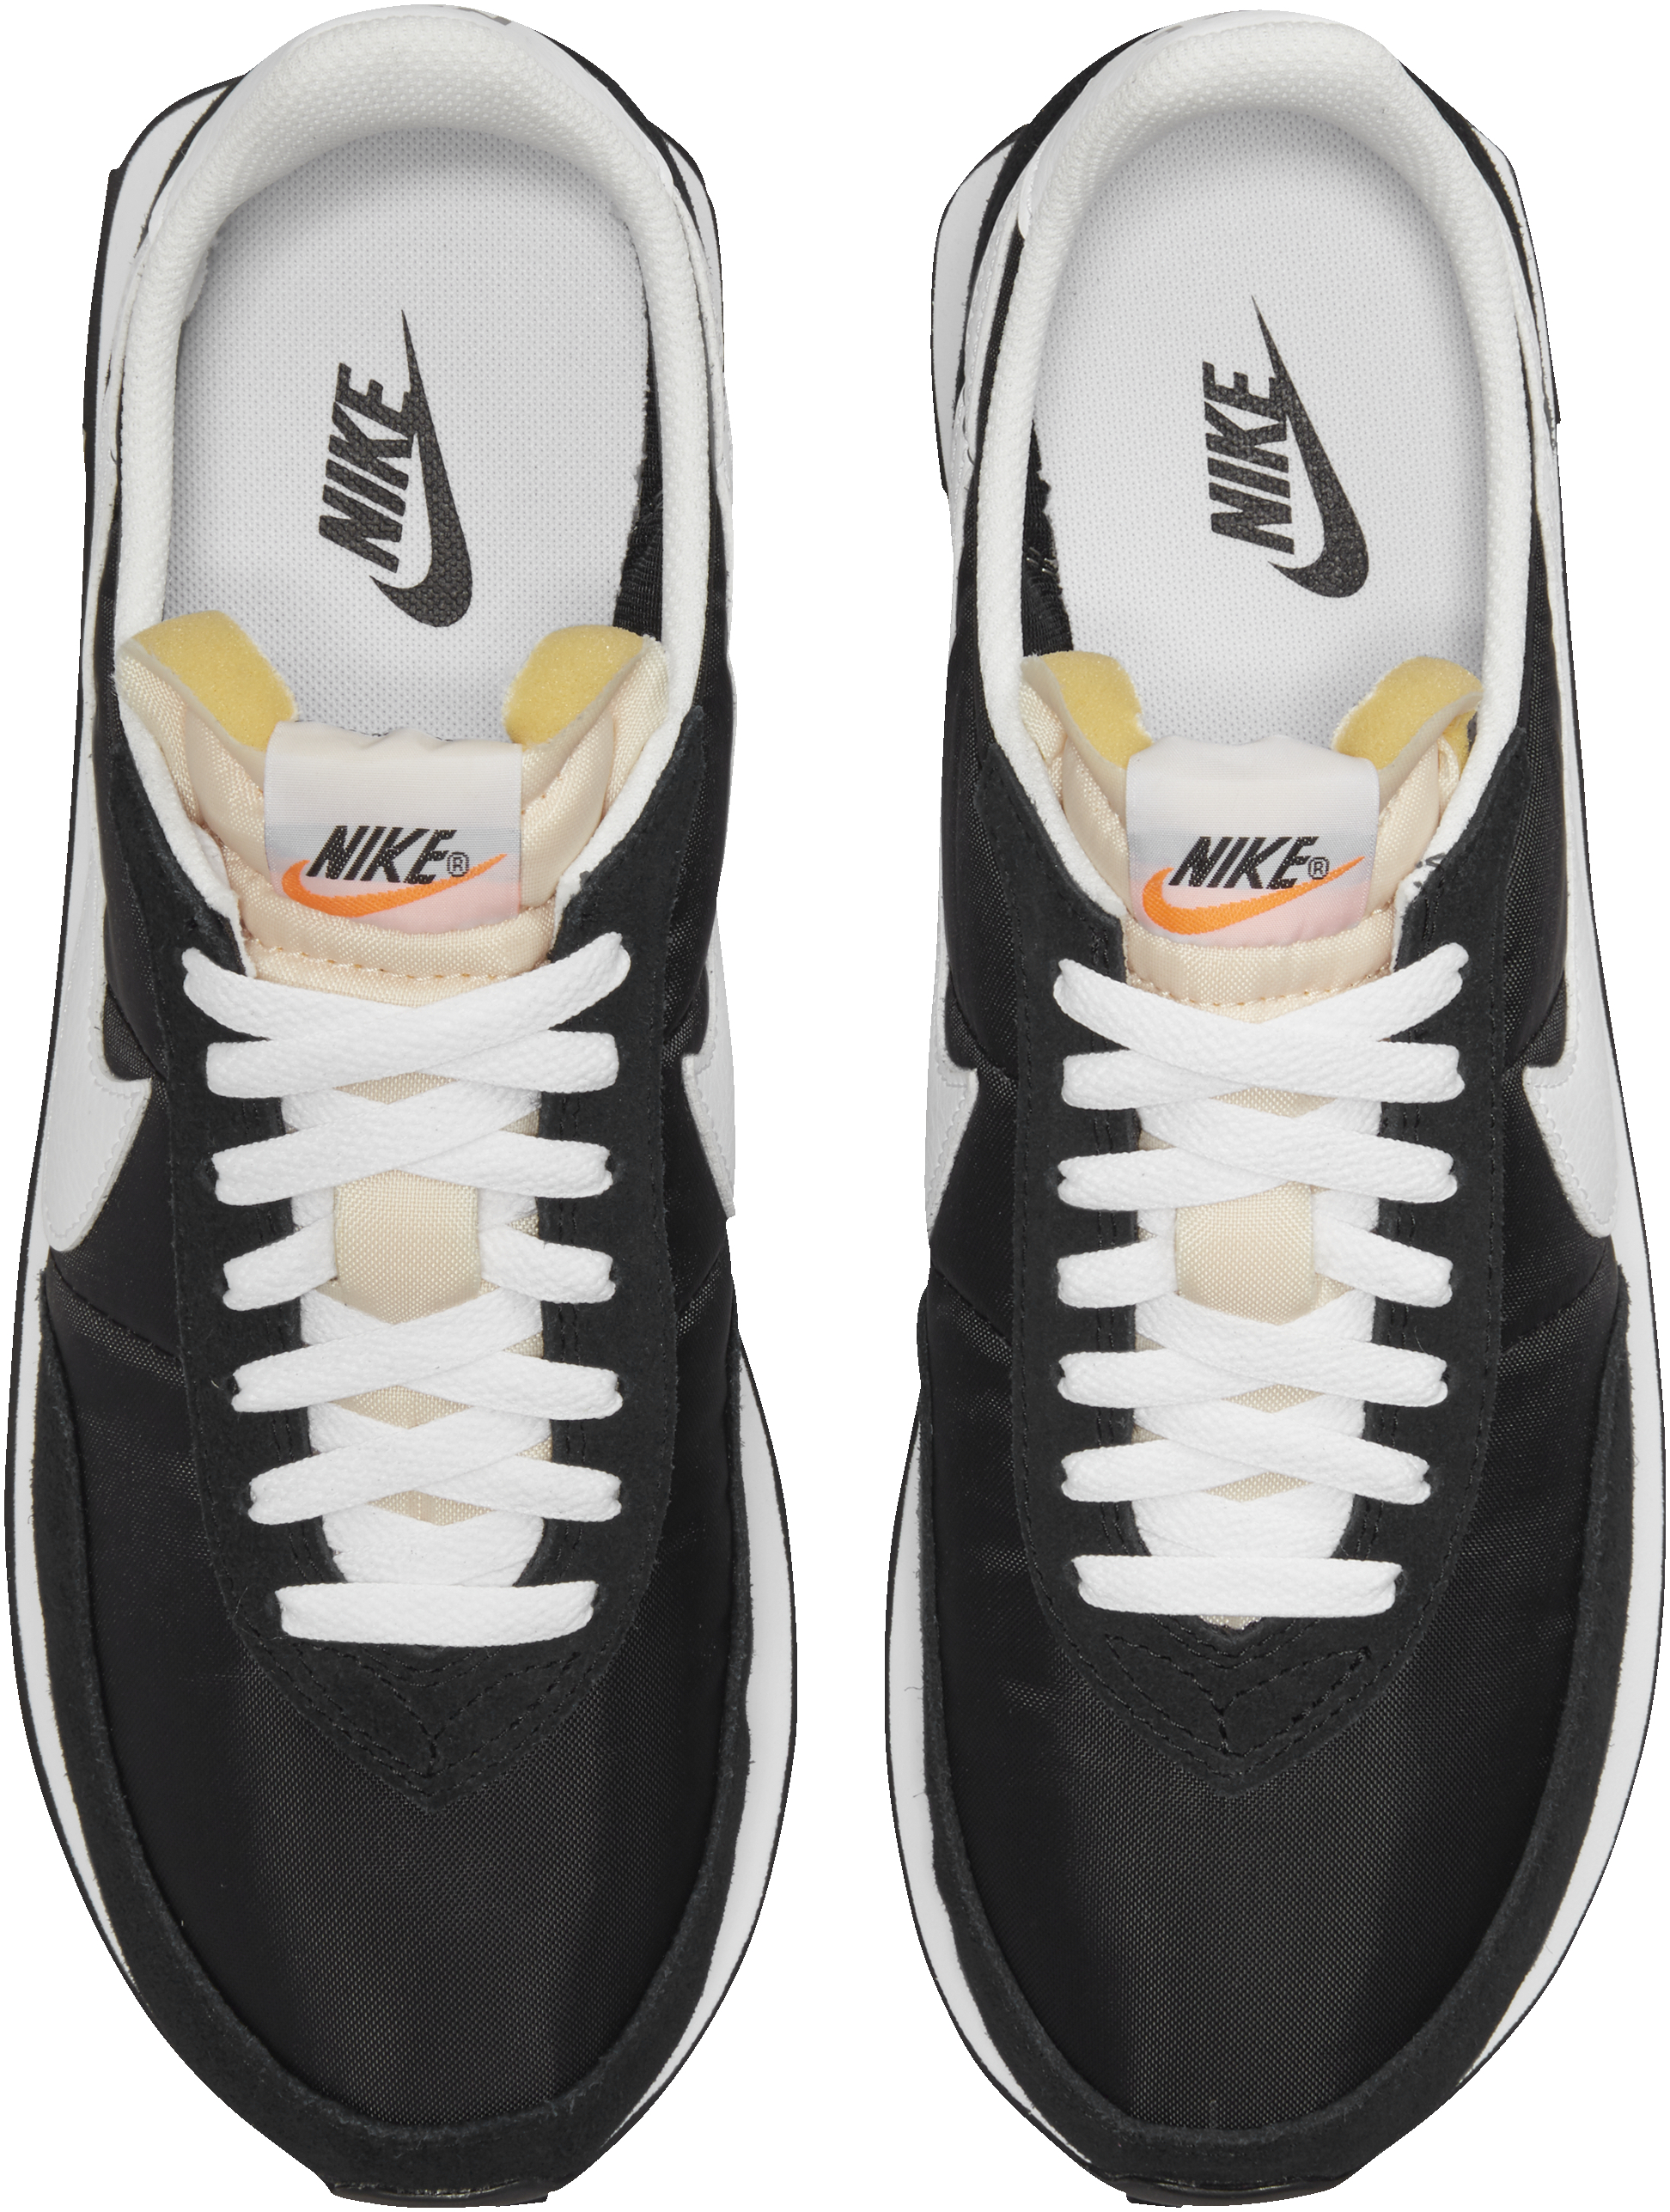 Nike waffle nike mens Waffle Trainer 2 sneakers in 10 colors (only $73) | RunRepeat